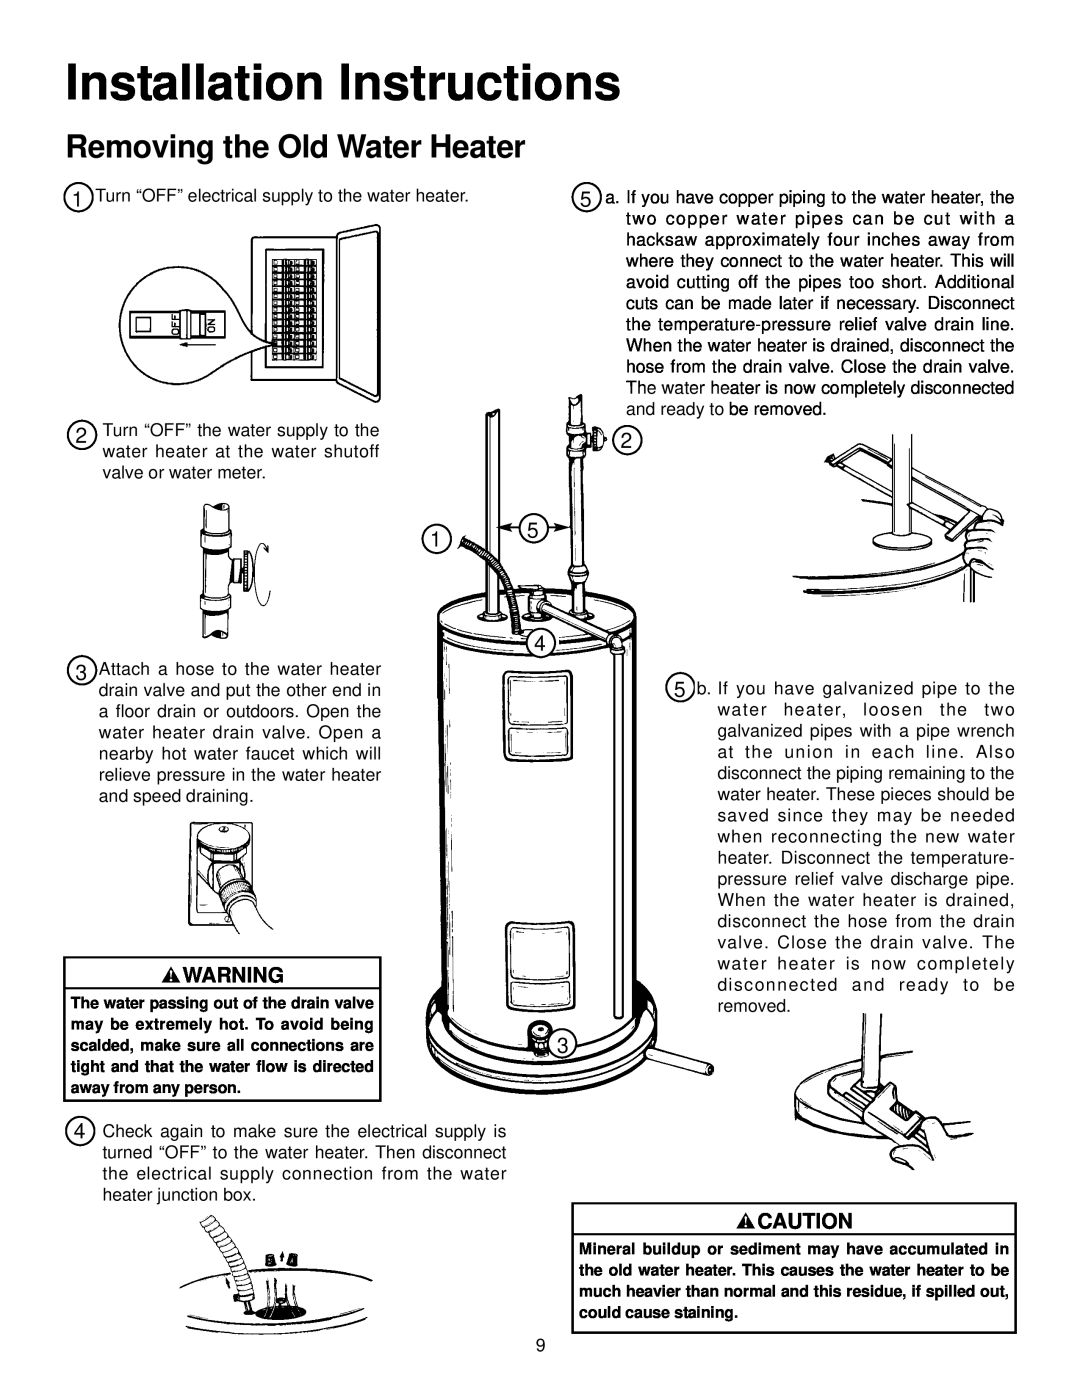 Maytag HR640DJRS, HR652SJRT, HR682SJRT, HR666DJRT, HR652DJRT manual Installation Instructions, Removing the Old Water Heater 